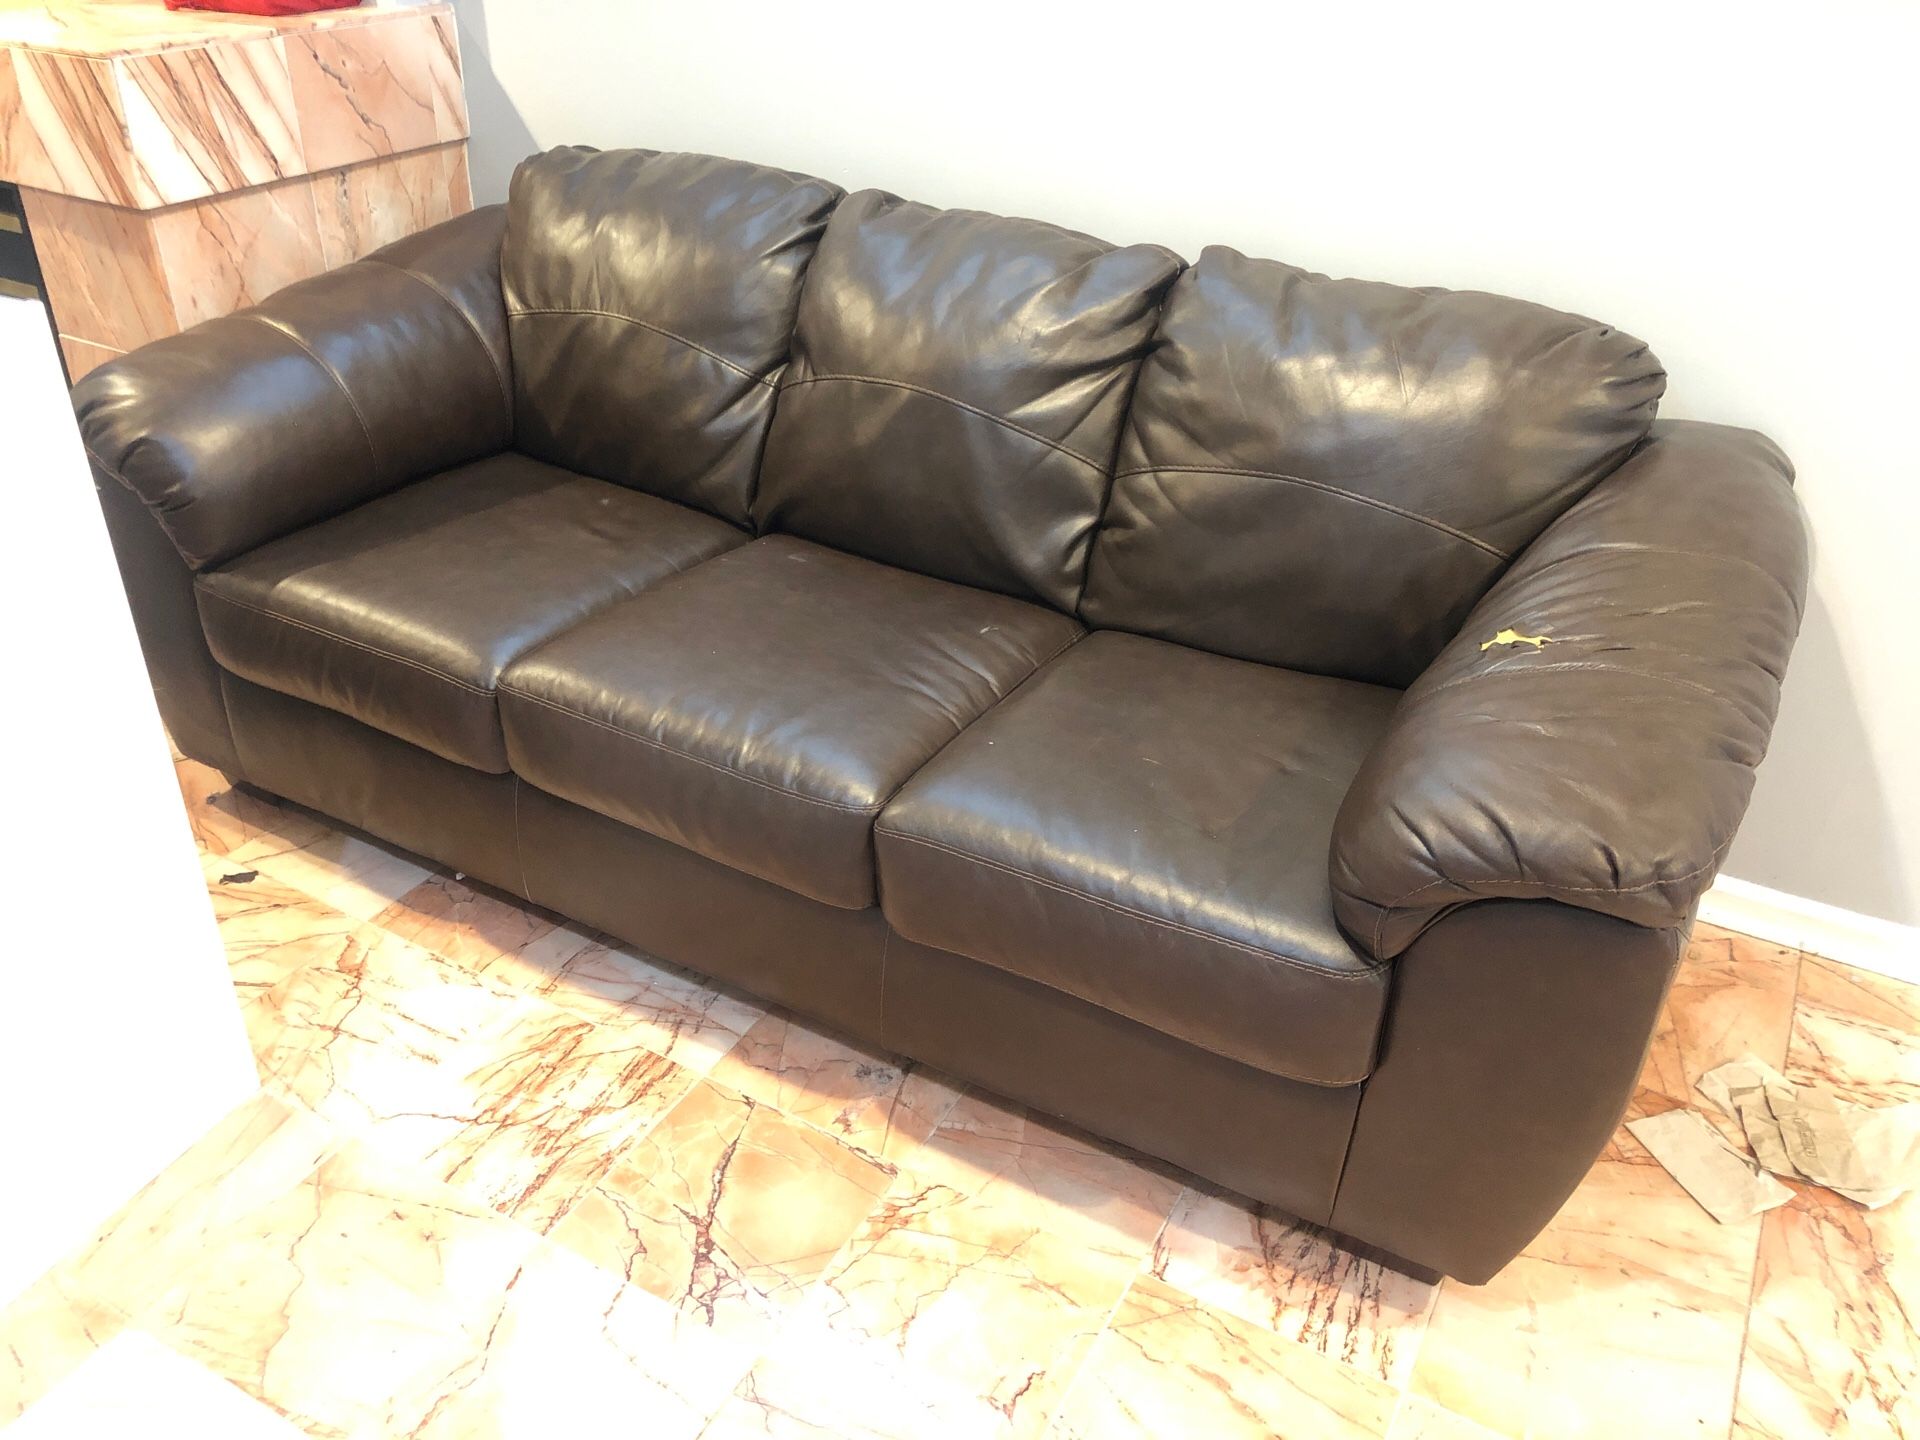 FREE- Leather couch with slight tear on arm